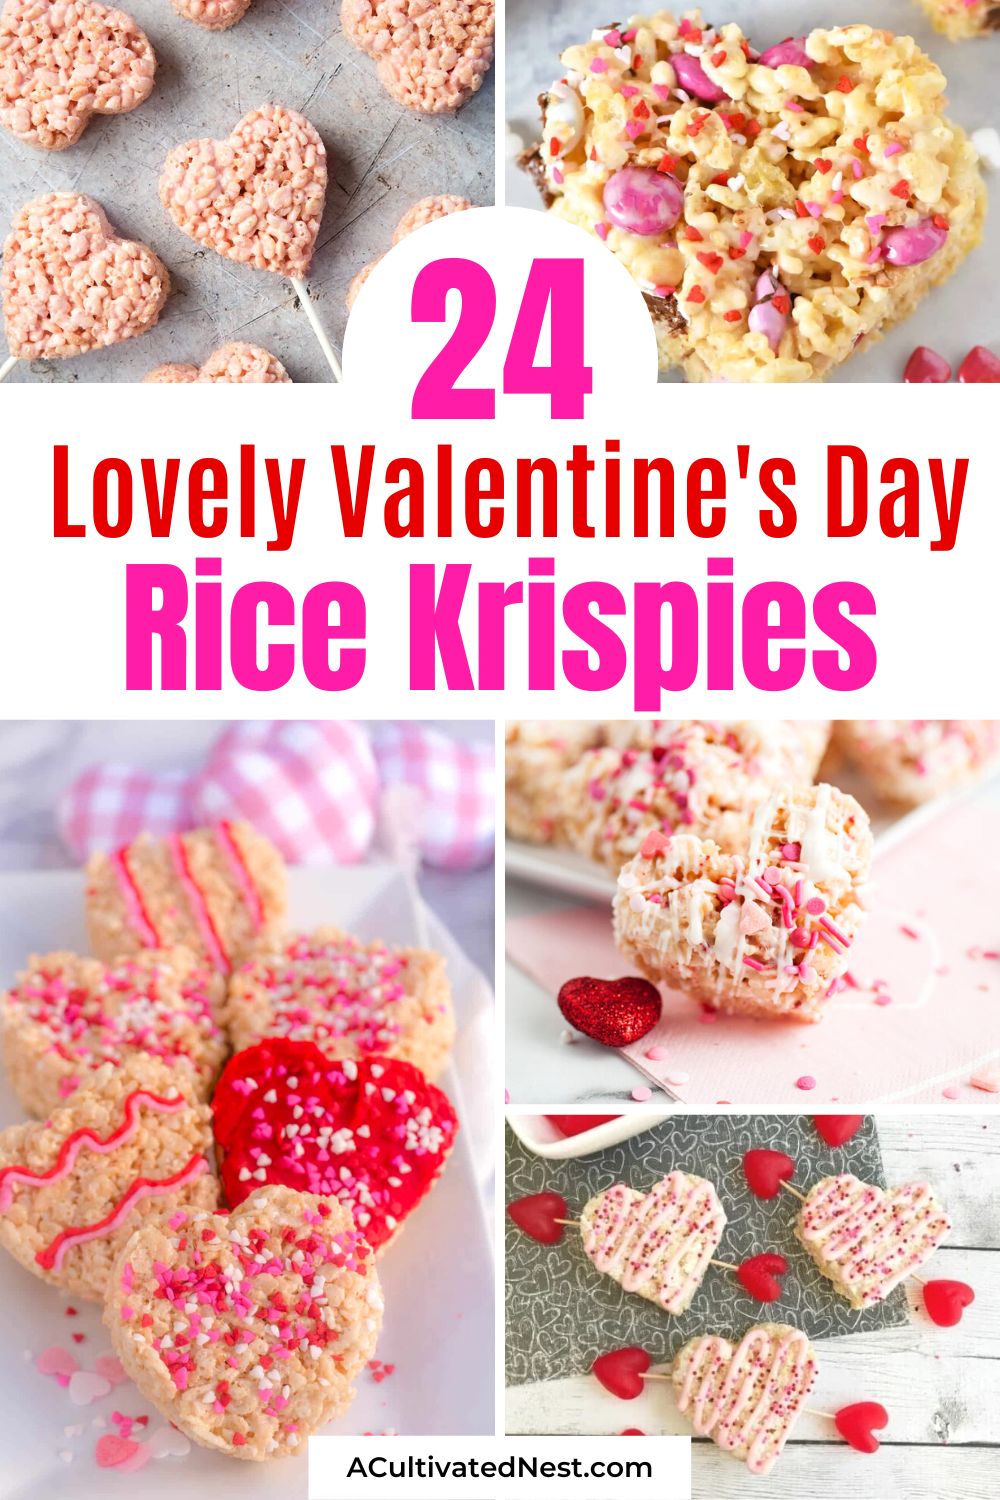 24 Delicious Valentine's Day Rice Krispie Treats- If you want a delicious way to spoil your special someone this Valentine's Day, check out these Valentine's Day rice krispie treats recipes! | Valentine's Day dessert recipes, Valentine's Day treats, #riceKrispieTreats #dessertRecipes #ValentinesDay #ValentinesDayDesserts #ACultivatedNest